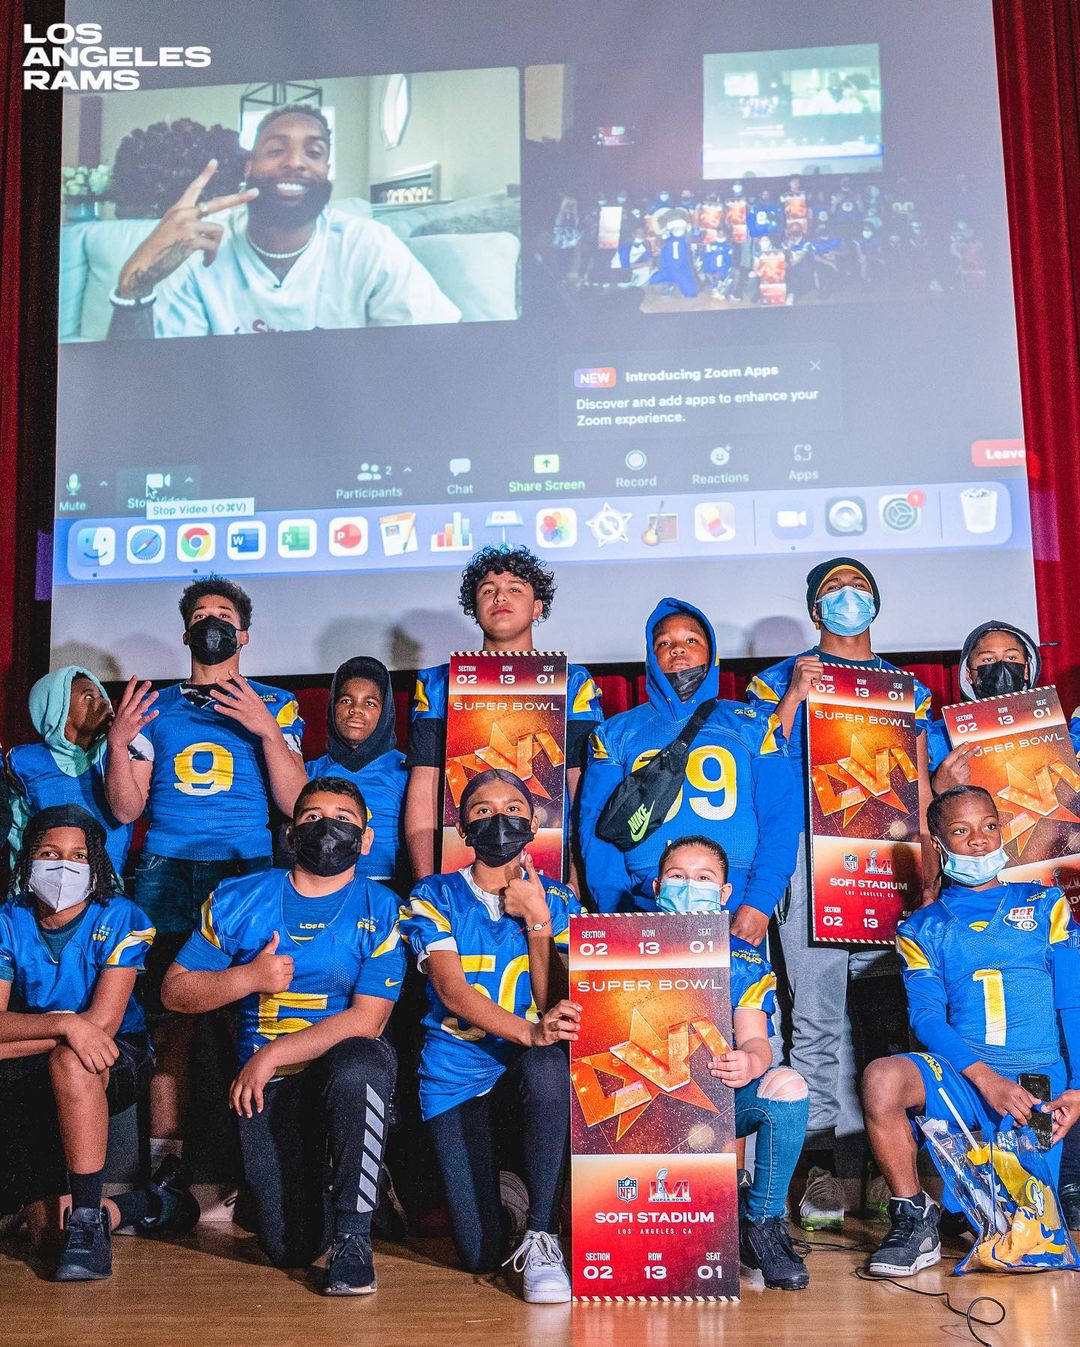 @obj surprises @WattsRams with tickets to #SBLVI + Rams unveil two new murals at...